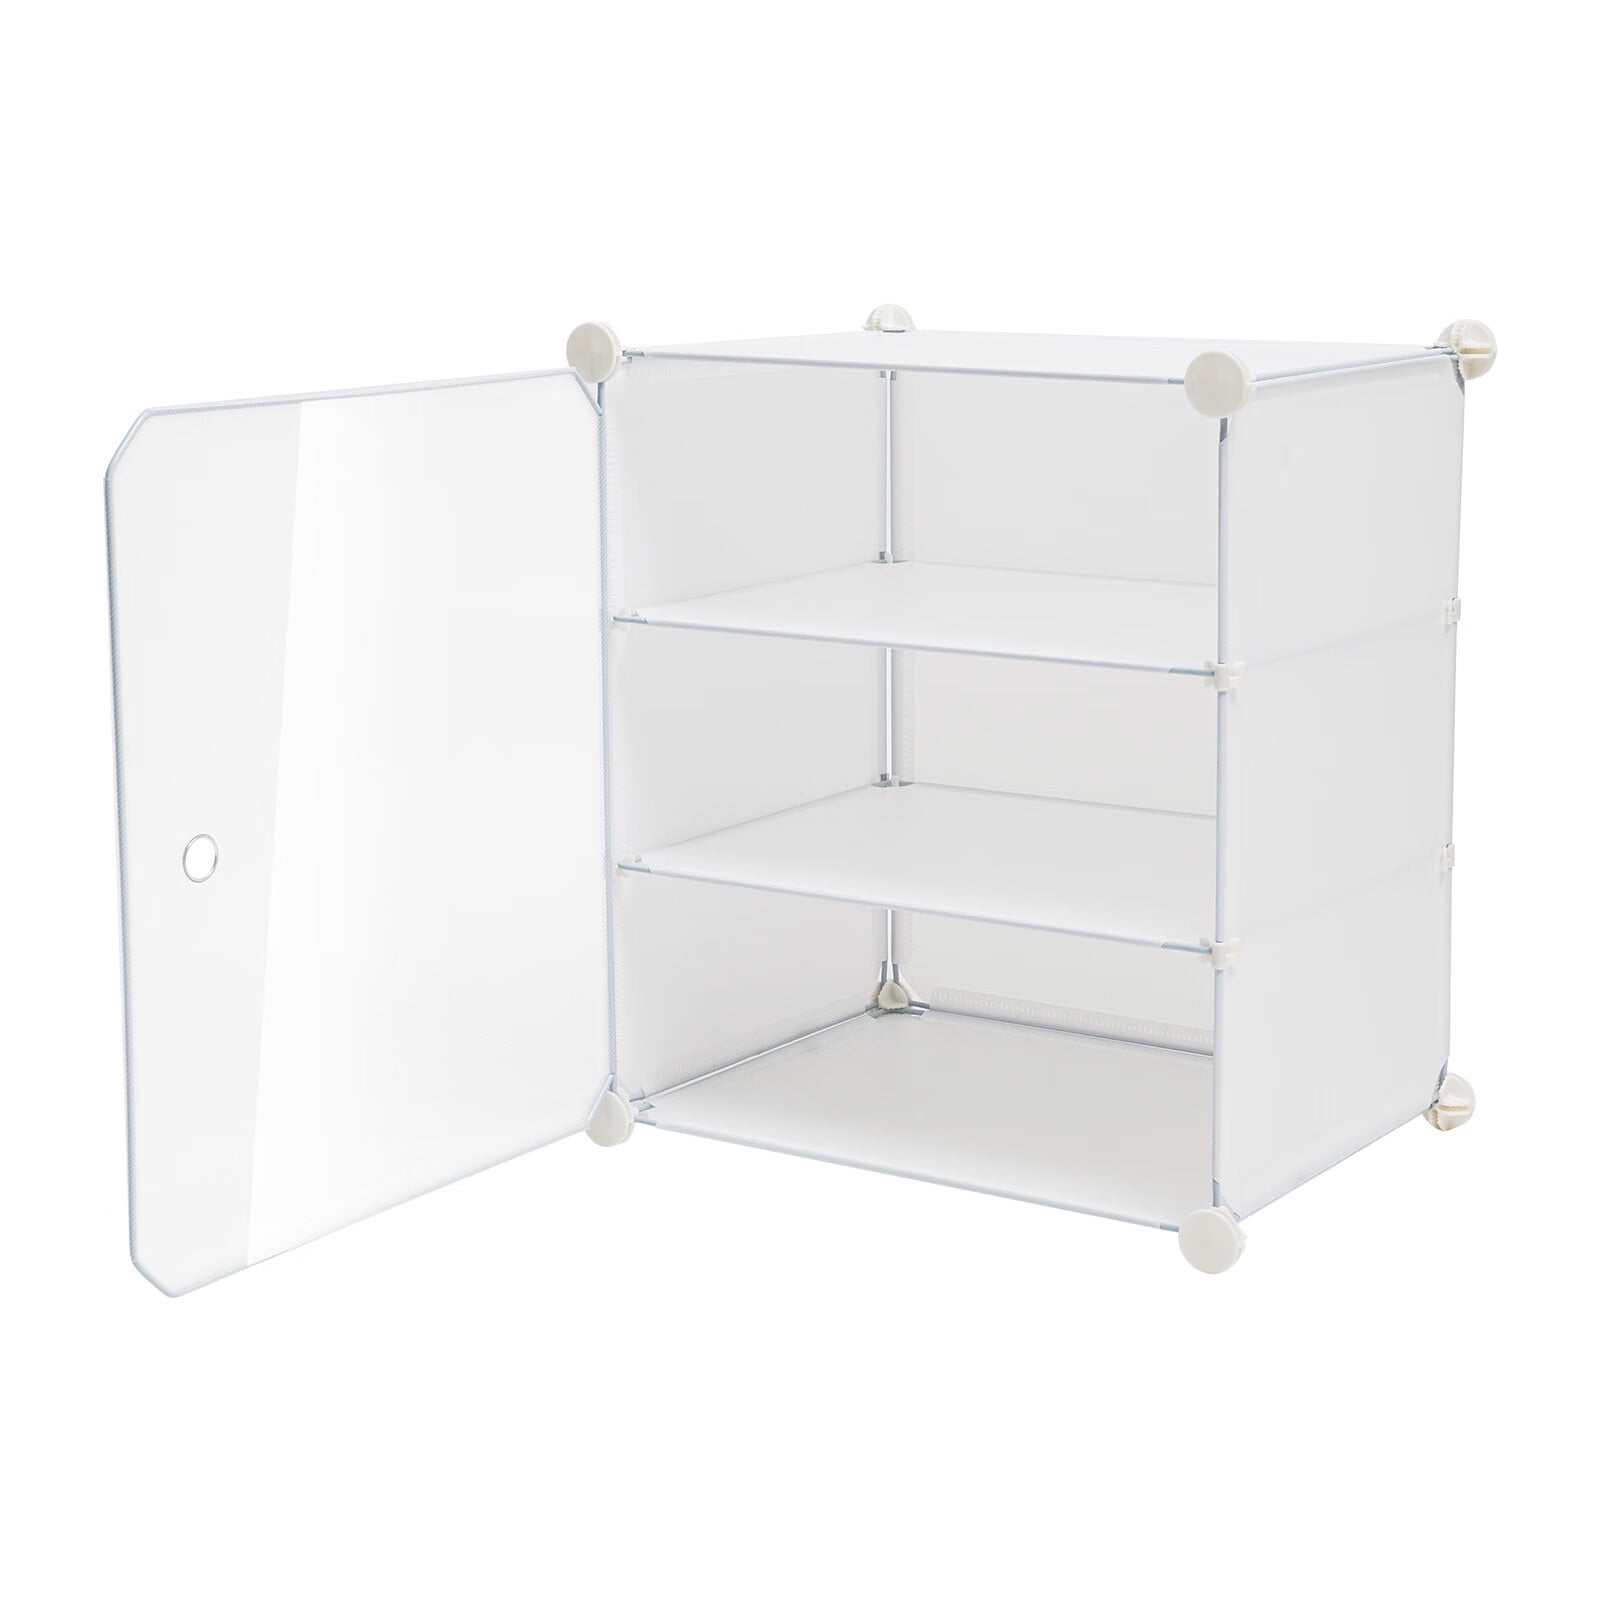 4 Tier Laminate Stackable Shoe Cubby White - Brightroom™ : Target